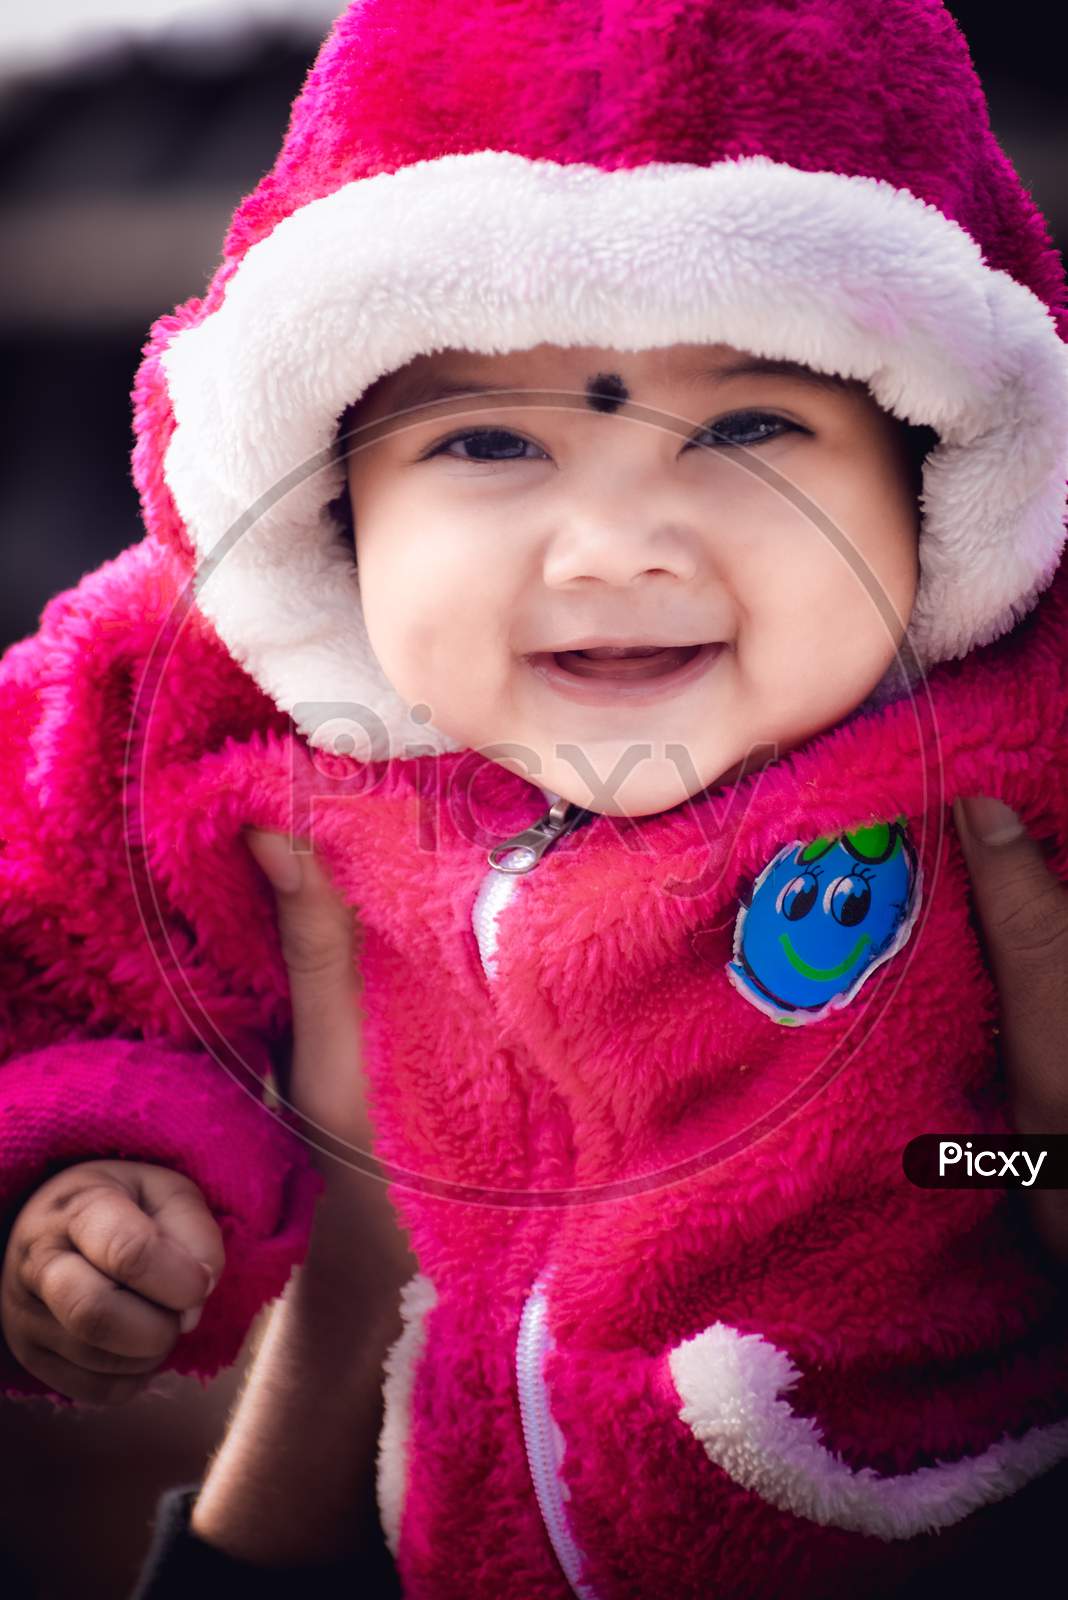 Baby laugh, baby cute expression